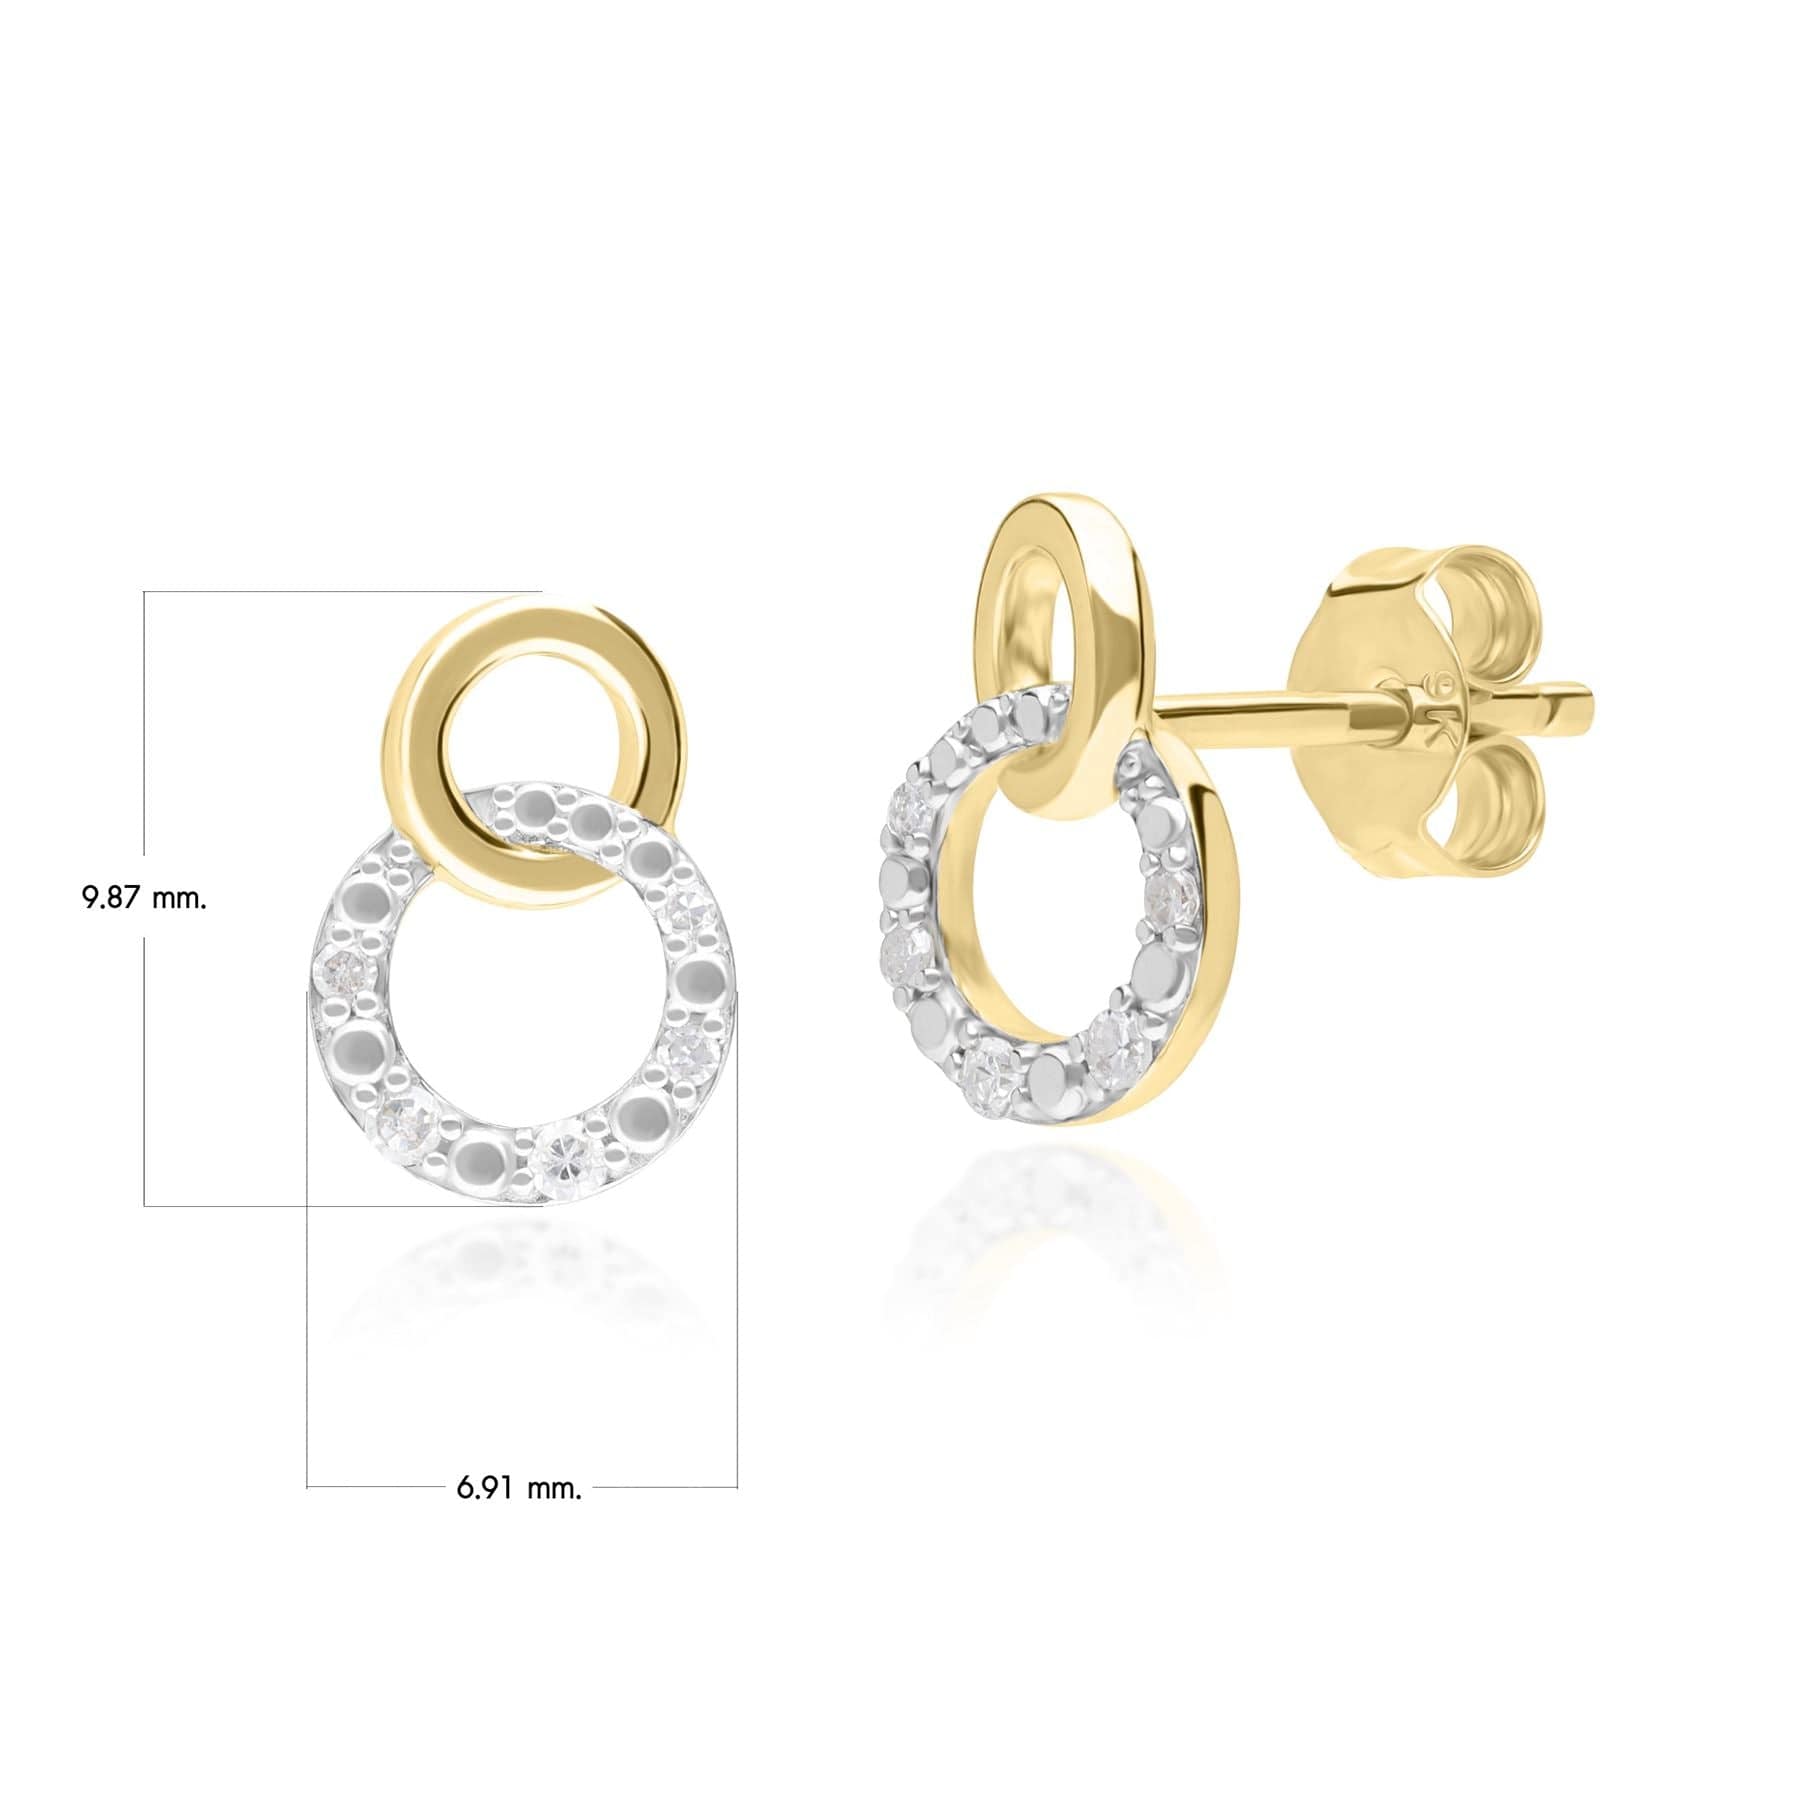 191E0433019 Diamond Pave Interlocking Hoop Stud Earrings in 9ct Yellow Gold Dimensions